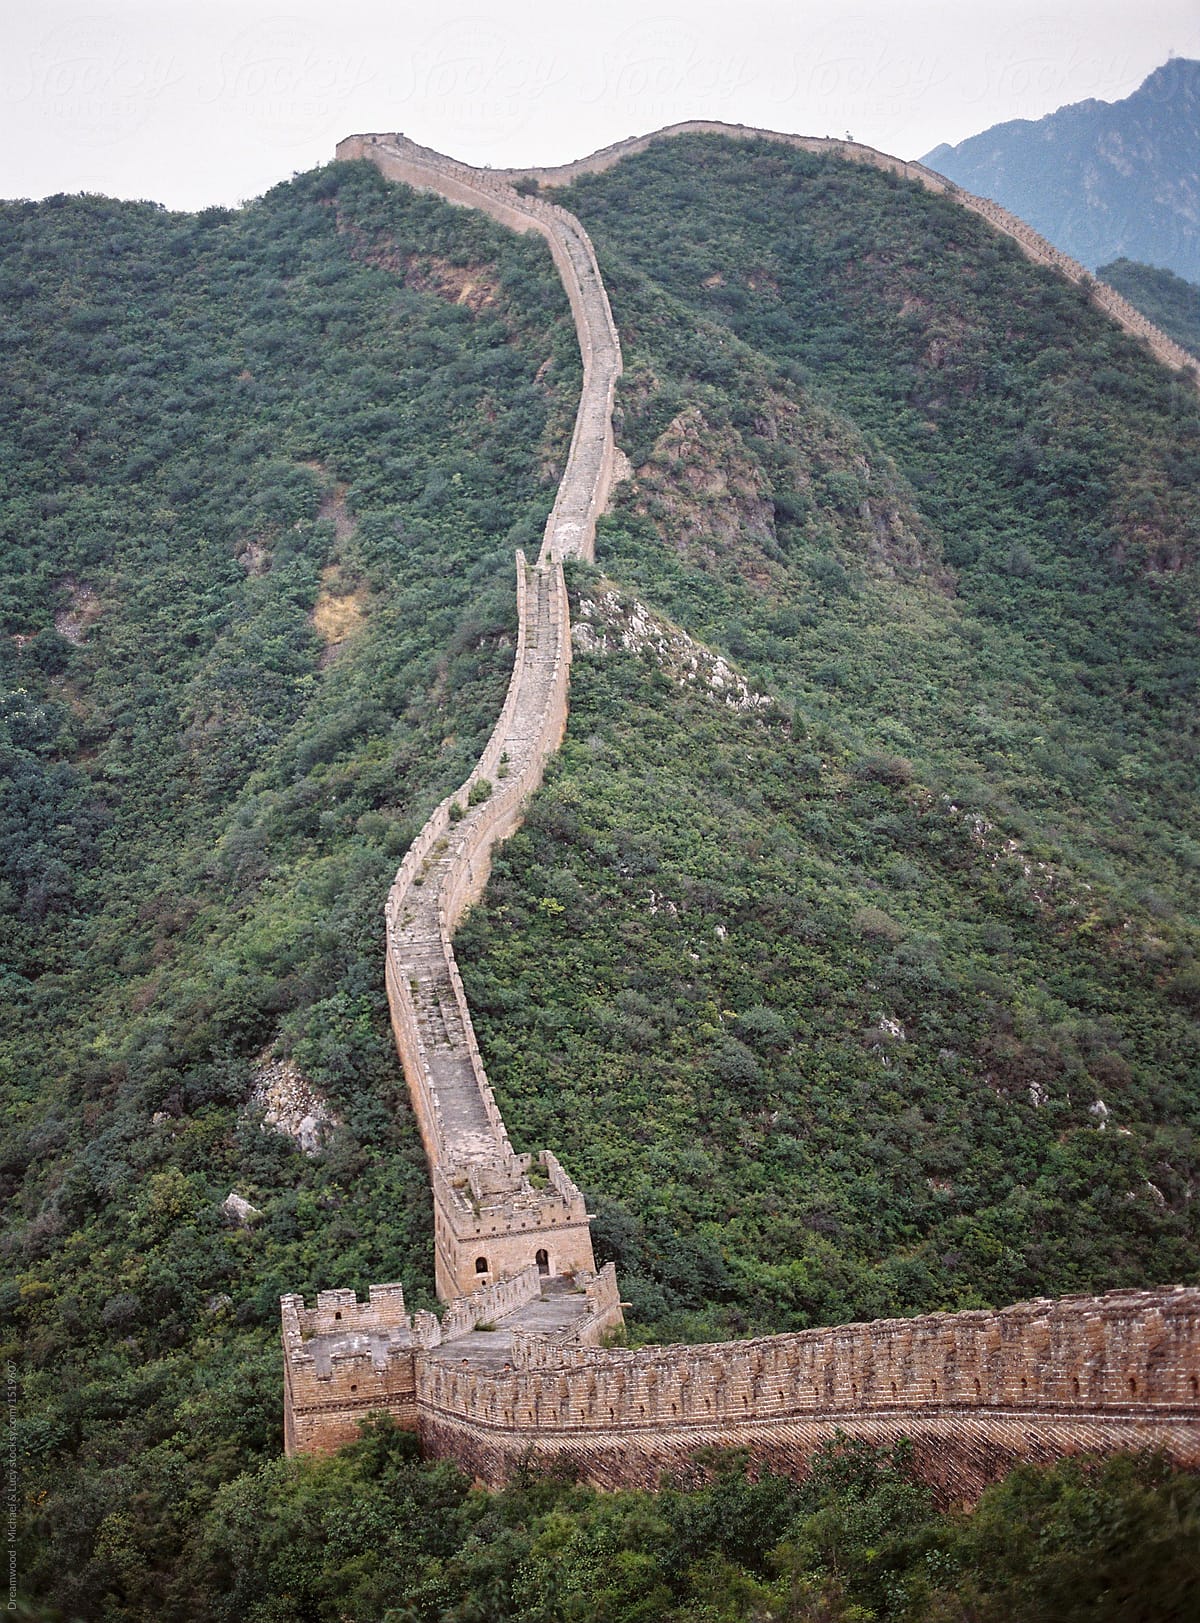 The Great Wall and mountain